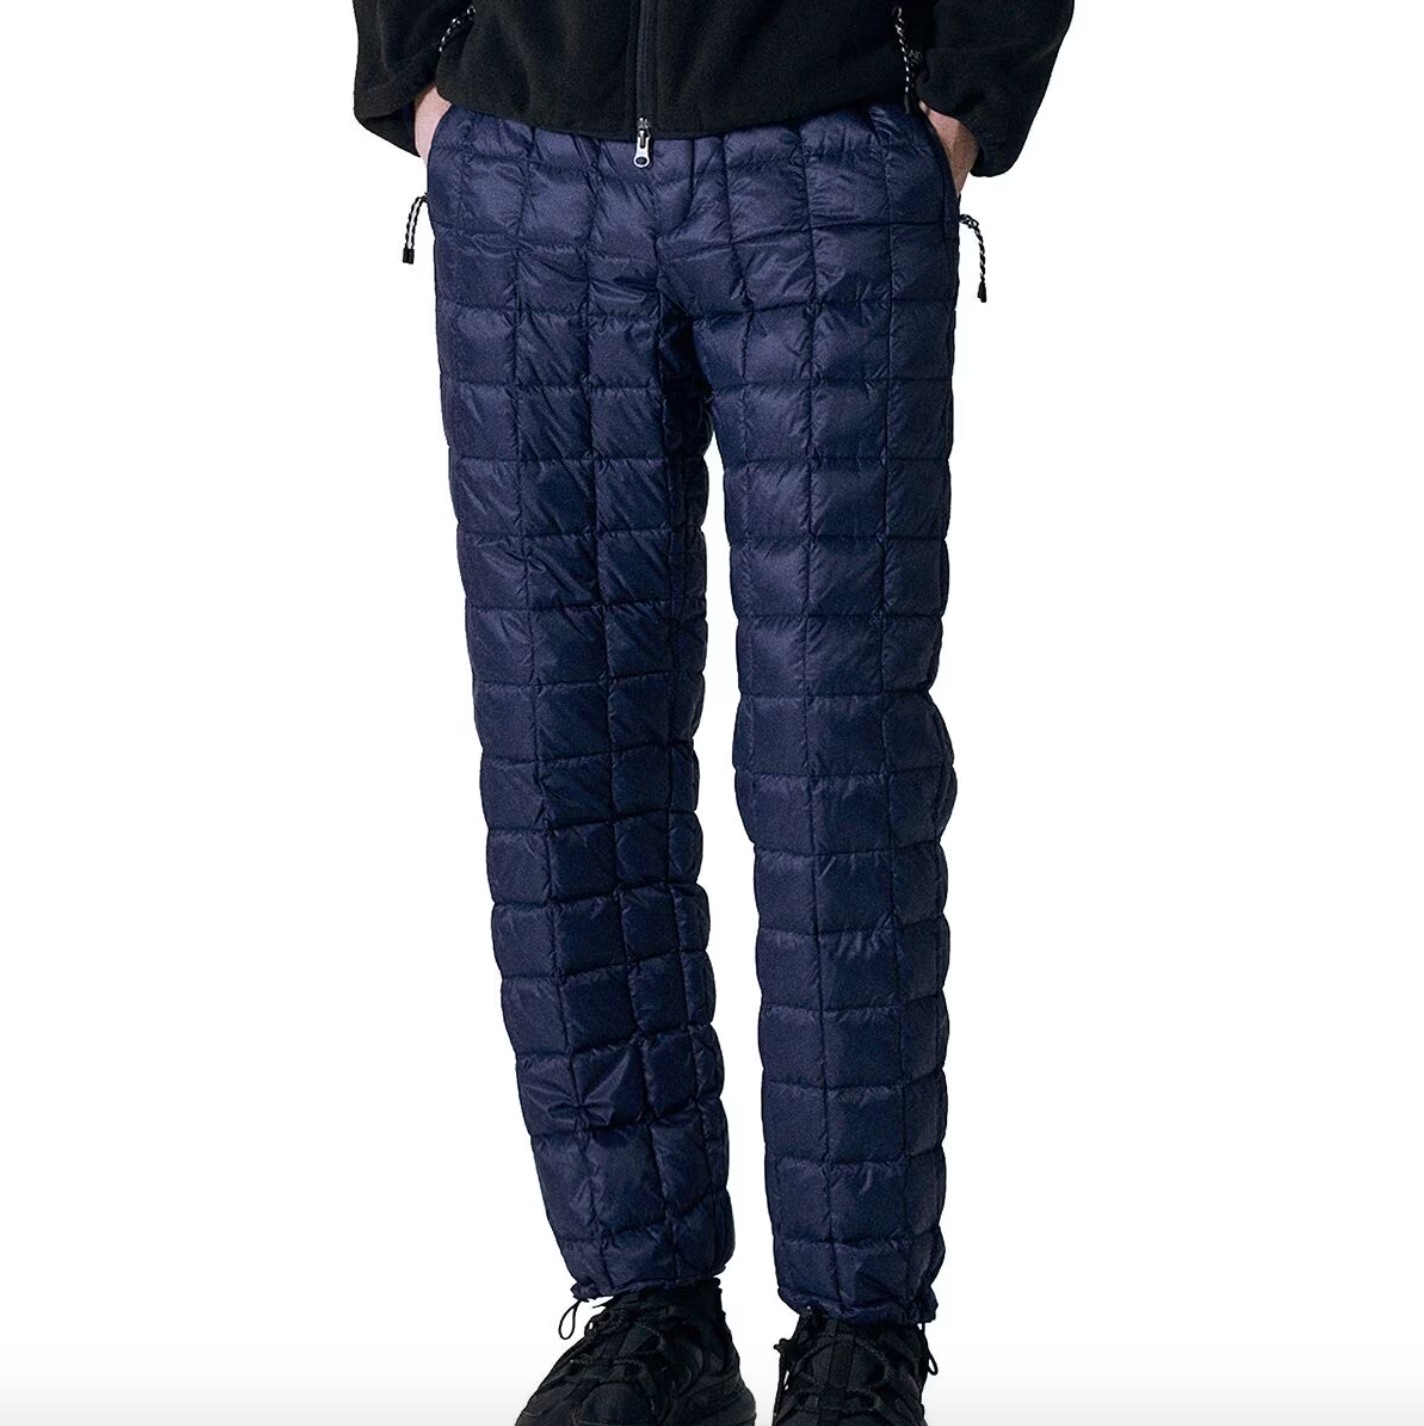 The 7 Best Puffer Pants for Staying Warm This Winter